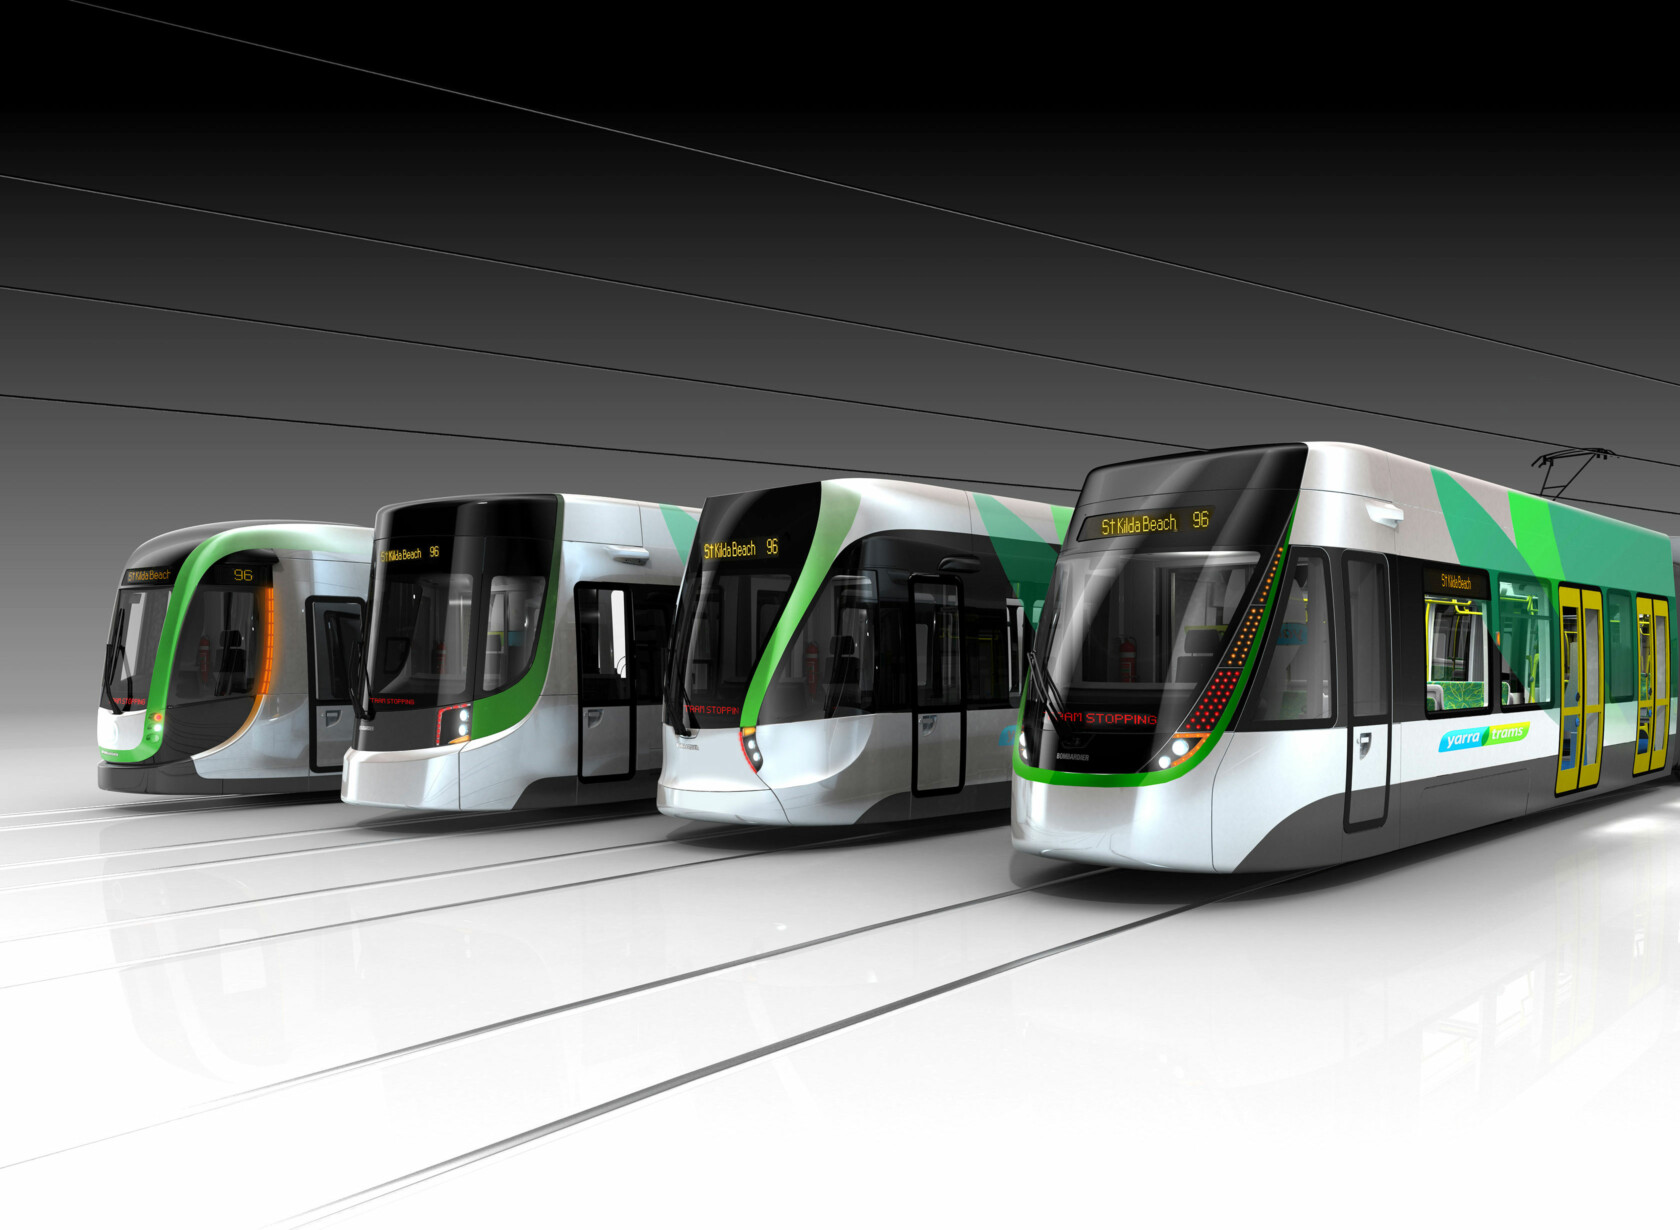 Progression of concept Tram exterior designs from the first to the final iteration